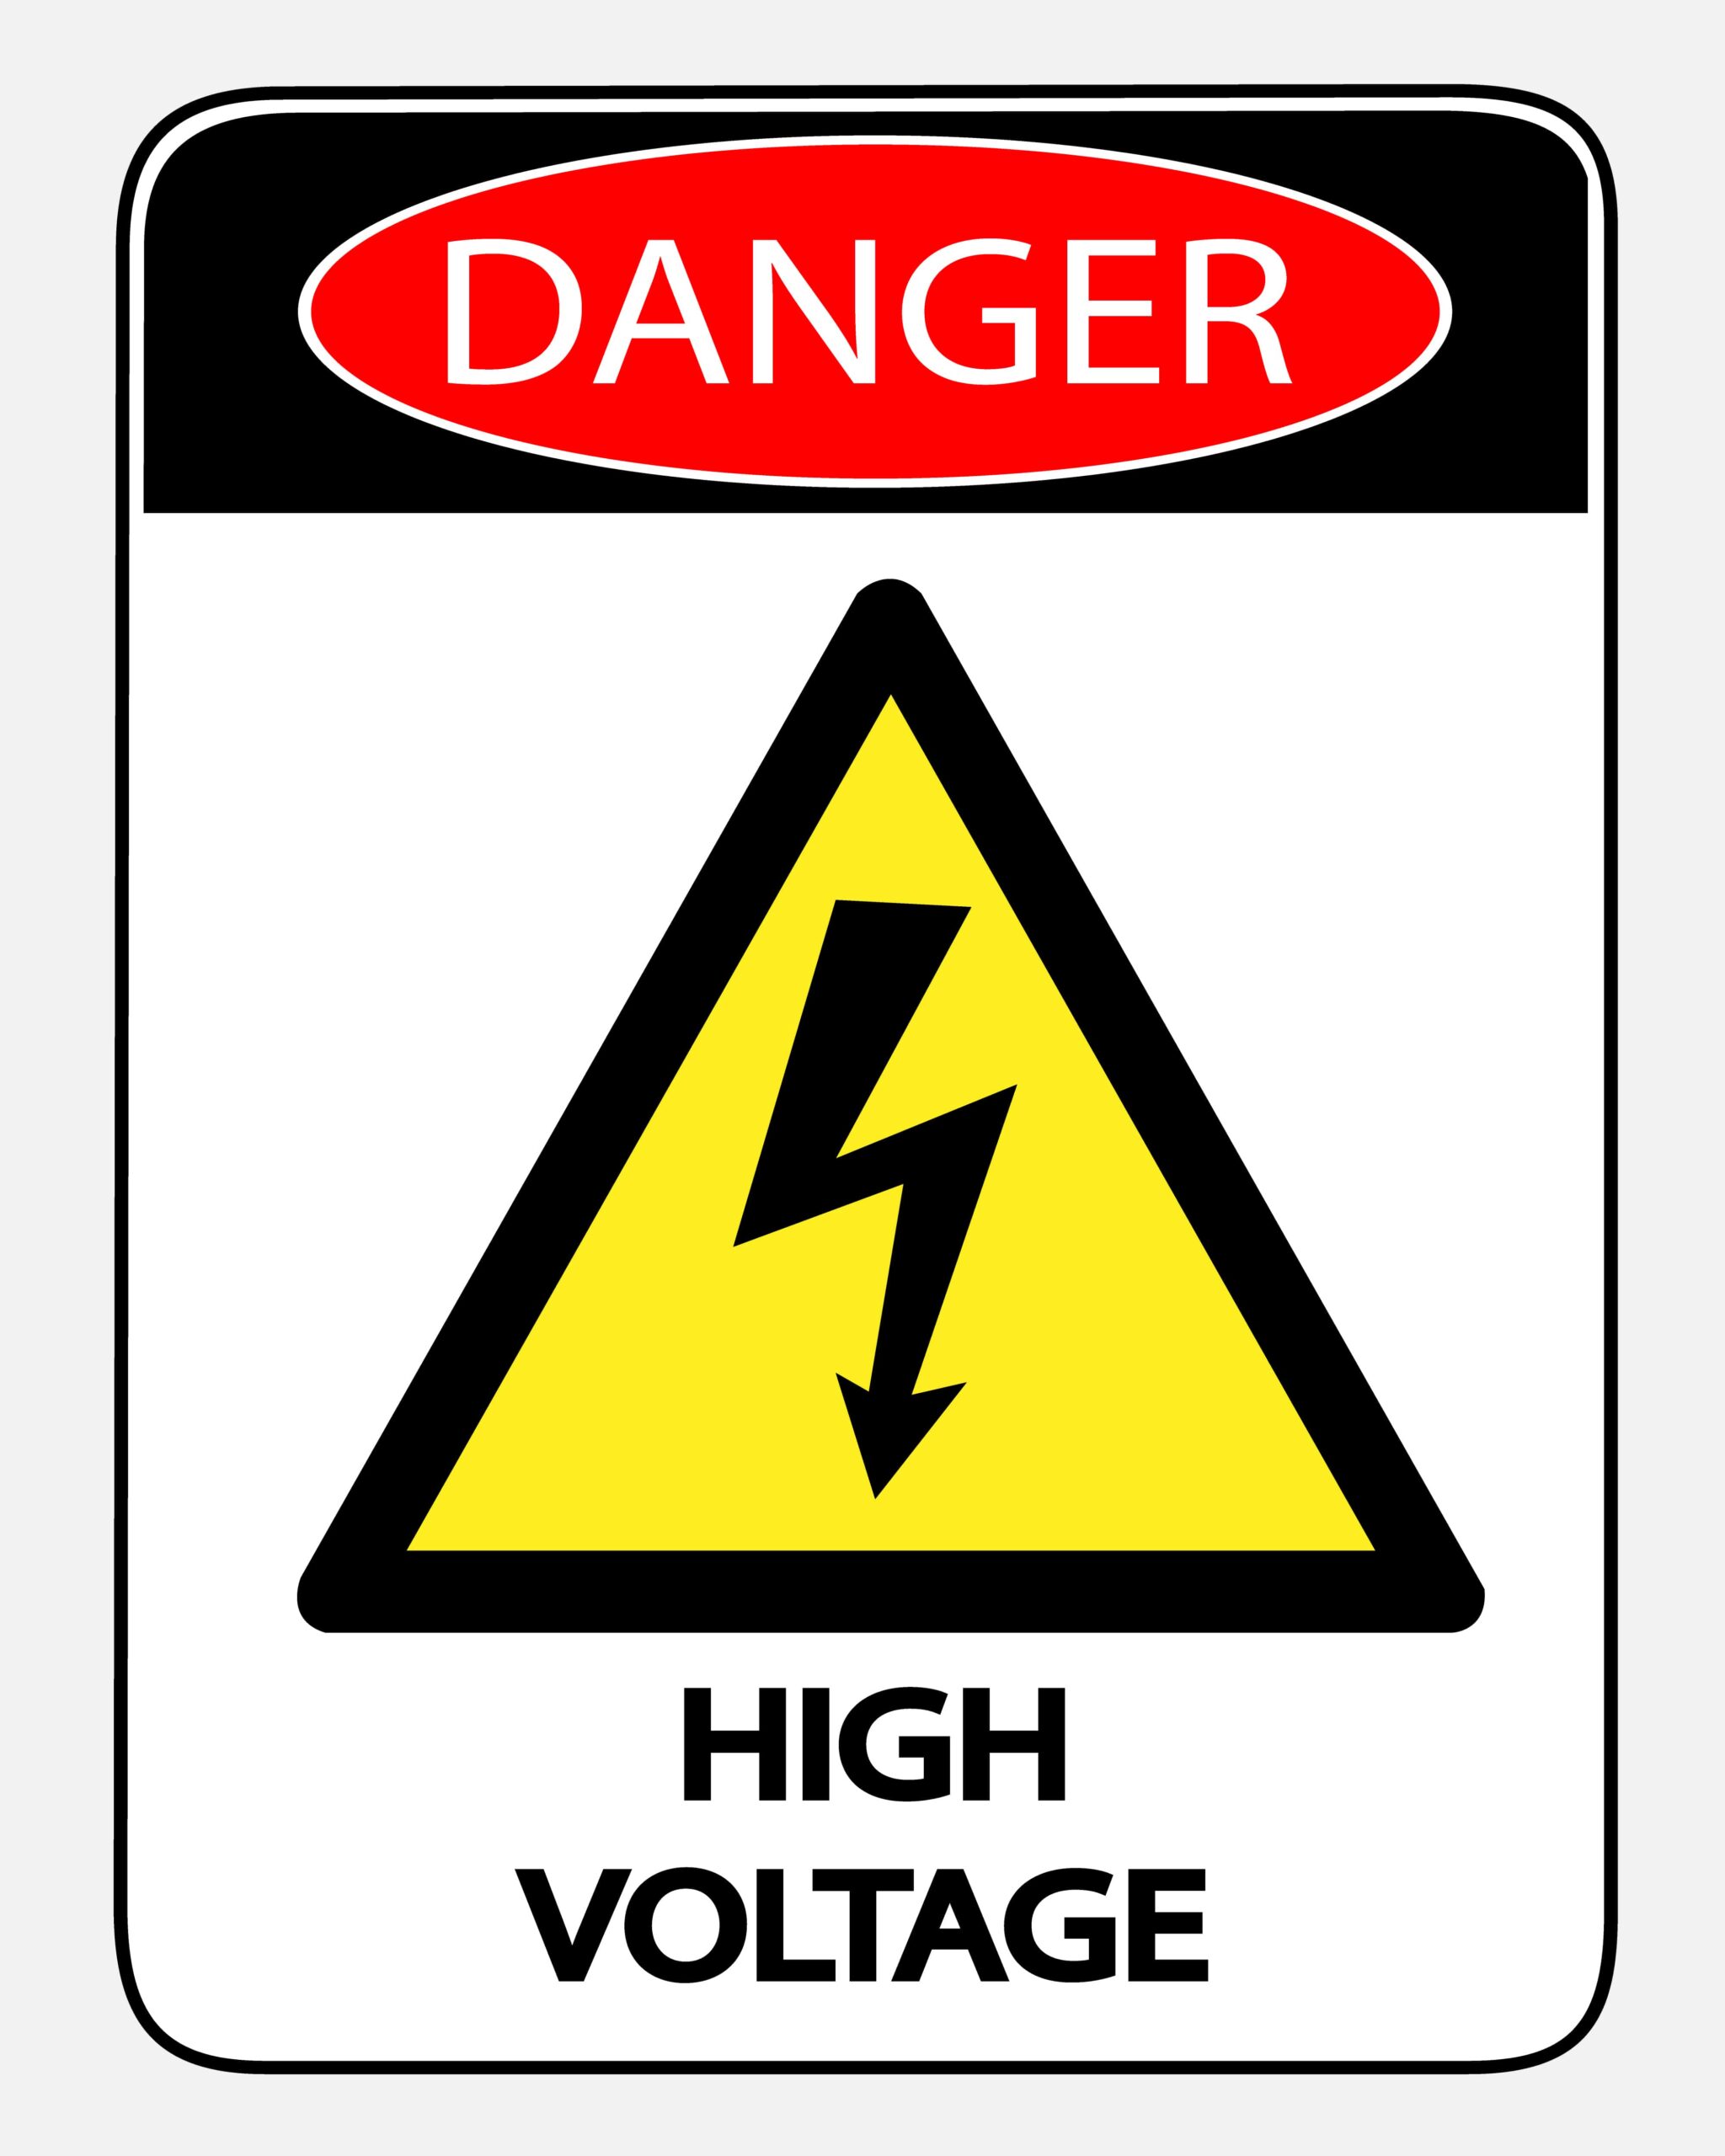 igh voltage applications are where observing conductor clearance and creepage distances is critical